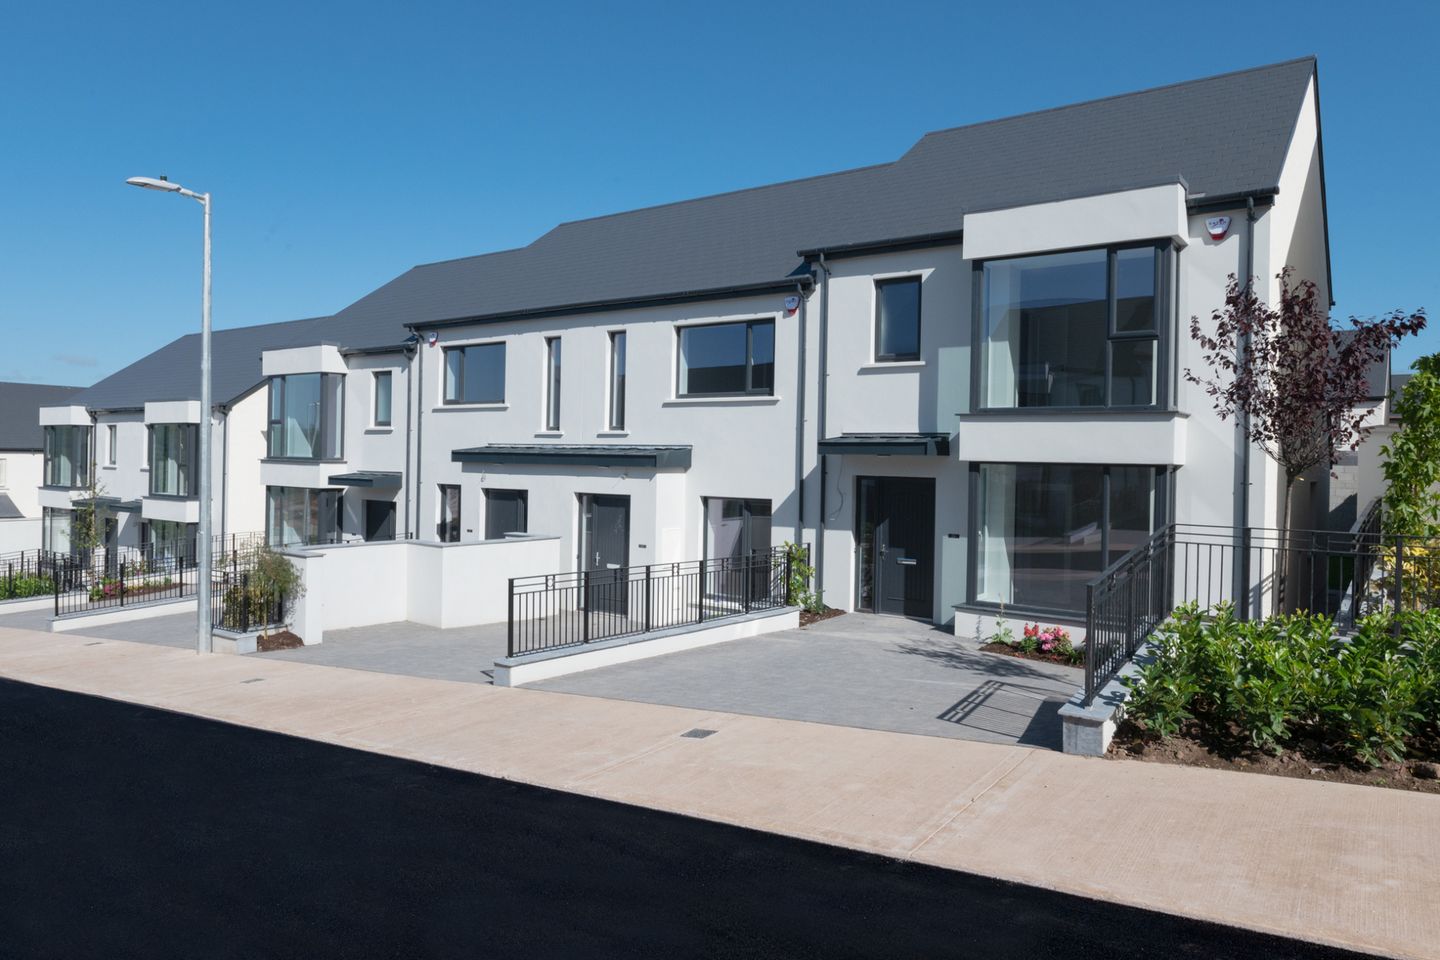 Two Bed Townhouse, Ballinglanna, Two Bed Townhouse, Ballinglanna, Glanmire, Co. Cork